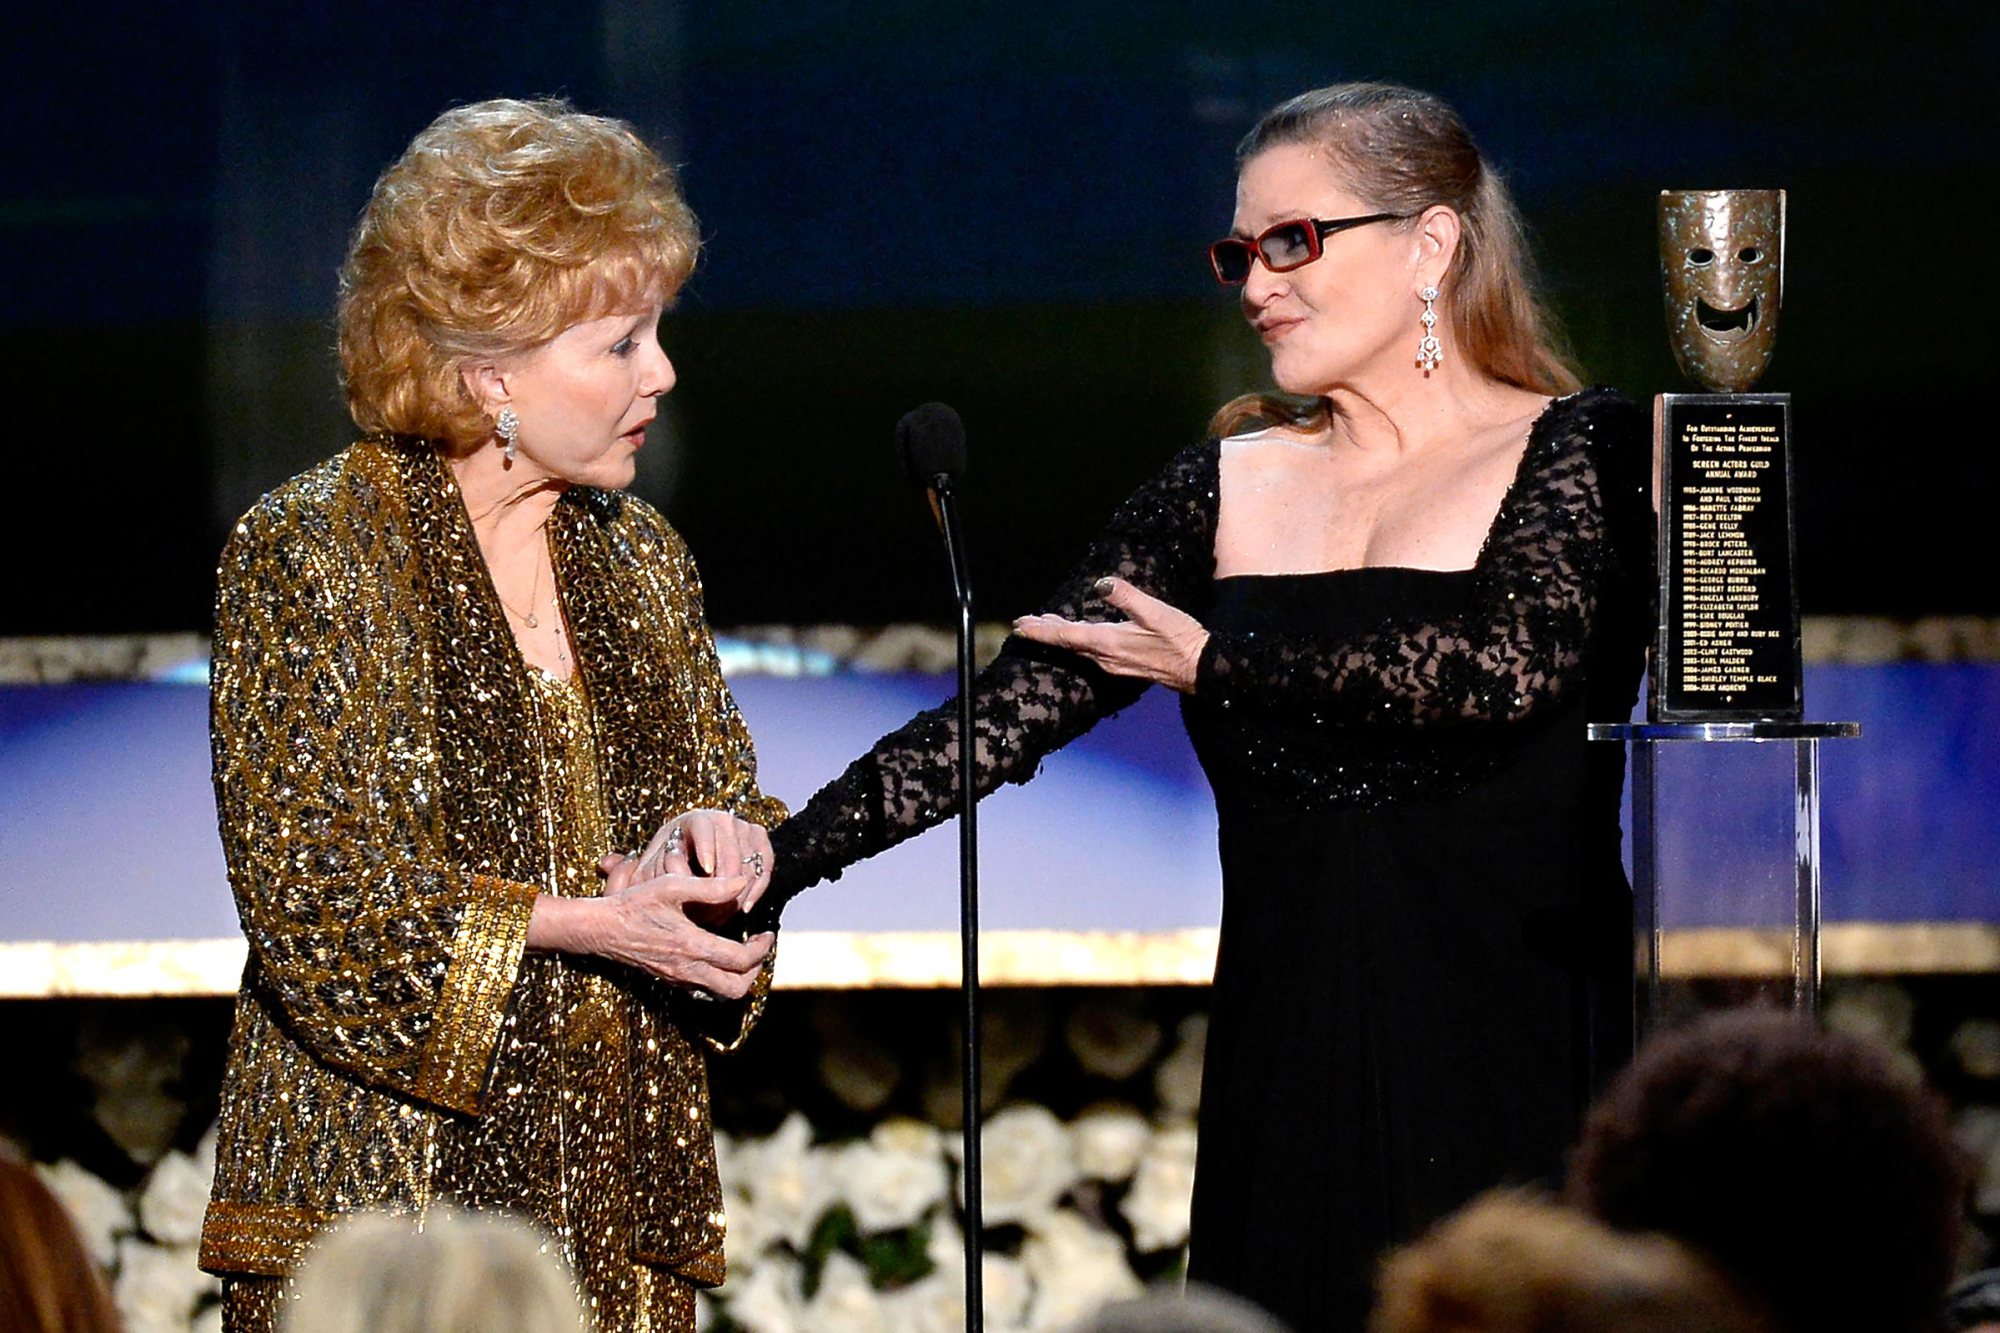 LOS ANGELES, CA - JANUARY 25: Actress Debbie Reynolds (L) accepts the Life Achievement Award from actress Carrie Fisher onstage at the 21st Annual Screen Actors Guild Awards at The Shrine Auditorium on January 25, 2015 in Los Angeles, California. (Photo by Kevork Djansezian/Getty Images)